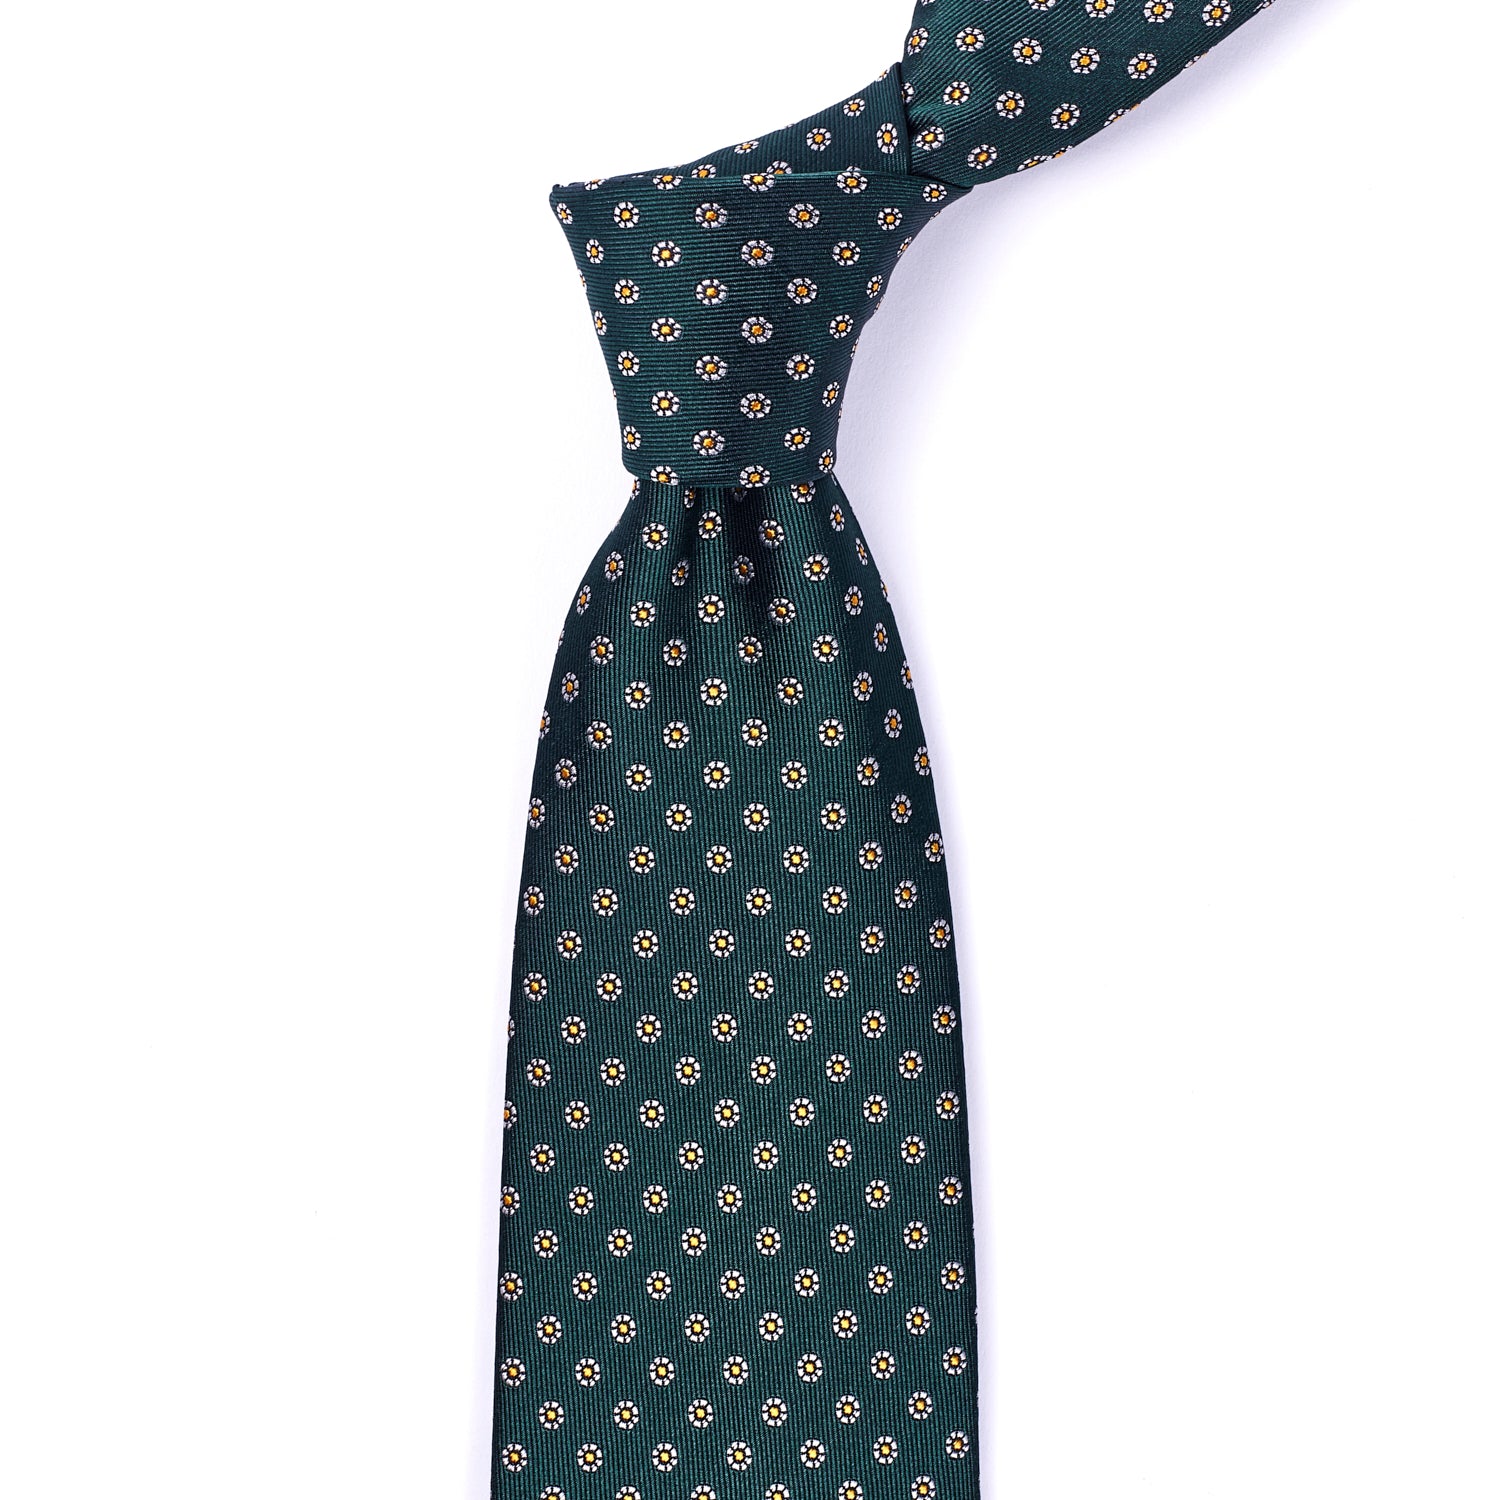 A Sovereign Grade Hunter Green Floral Jacquard Tie, 150 cm from KirbyAllison.com with a polka dot pattern of the highest quality.